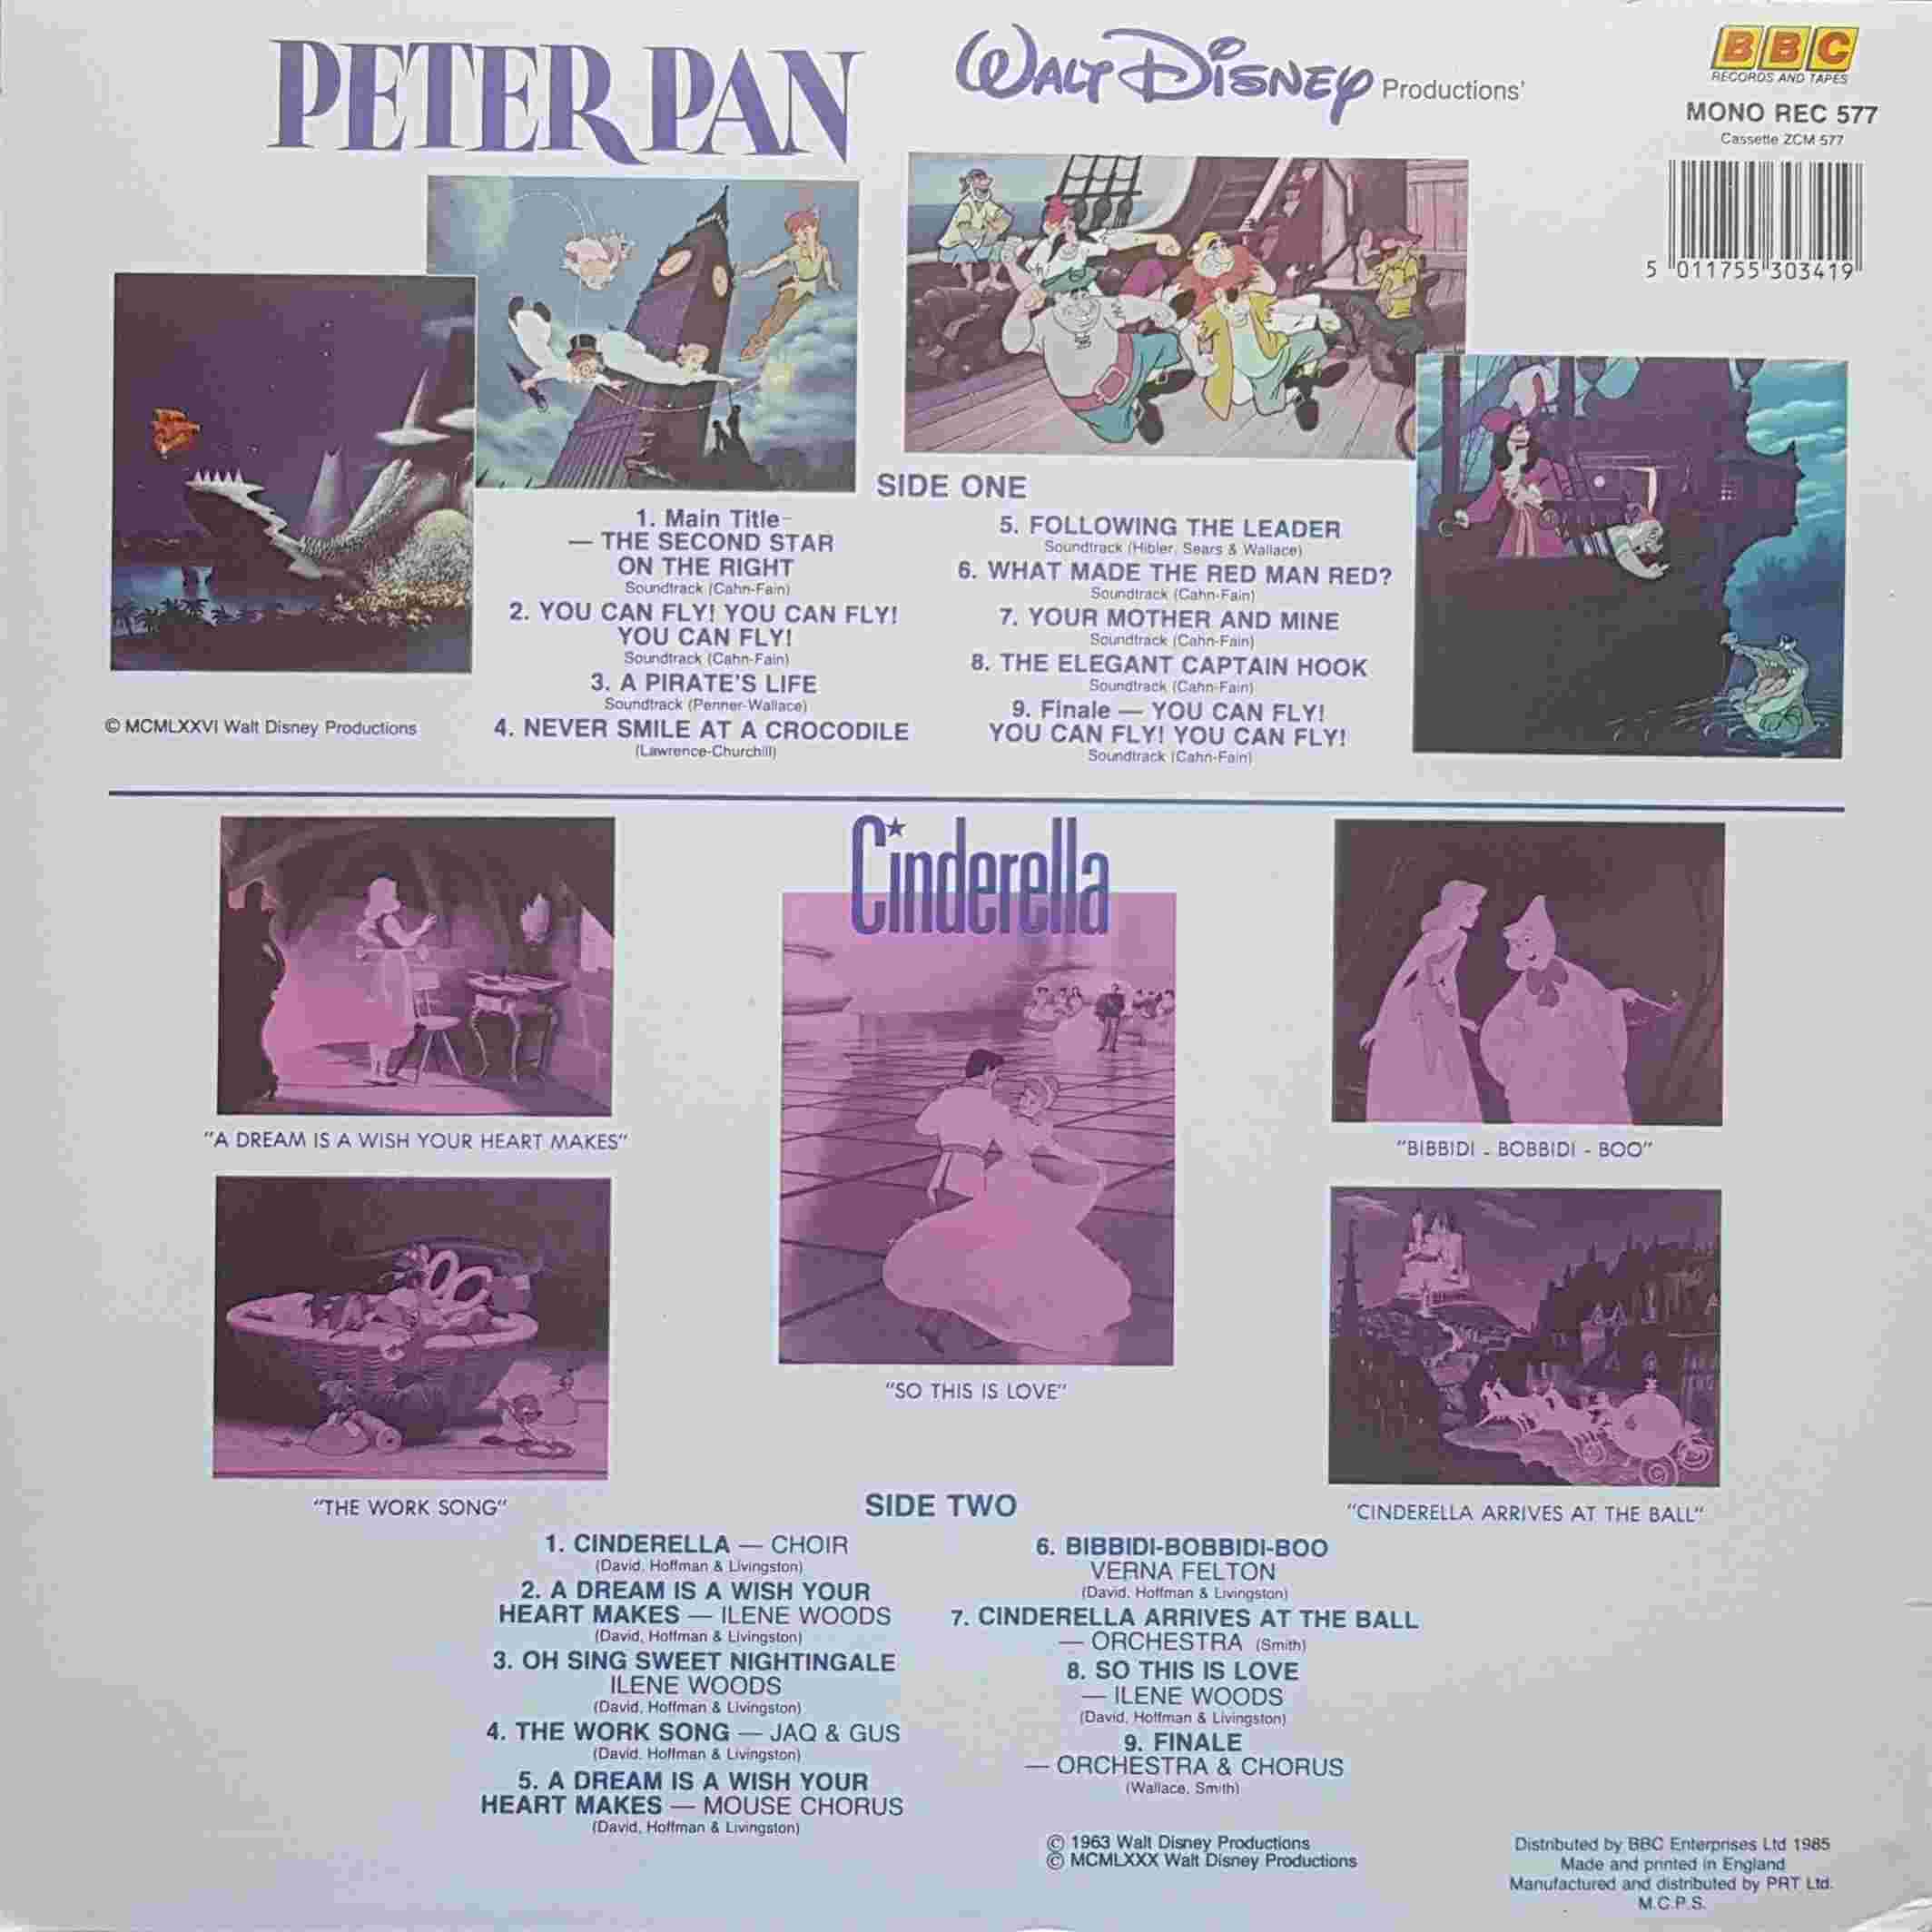 Picture of REC 577 Peter Pan and Cinderella by artist Various from the BBC records and Tapes library